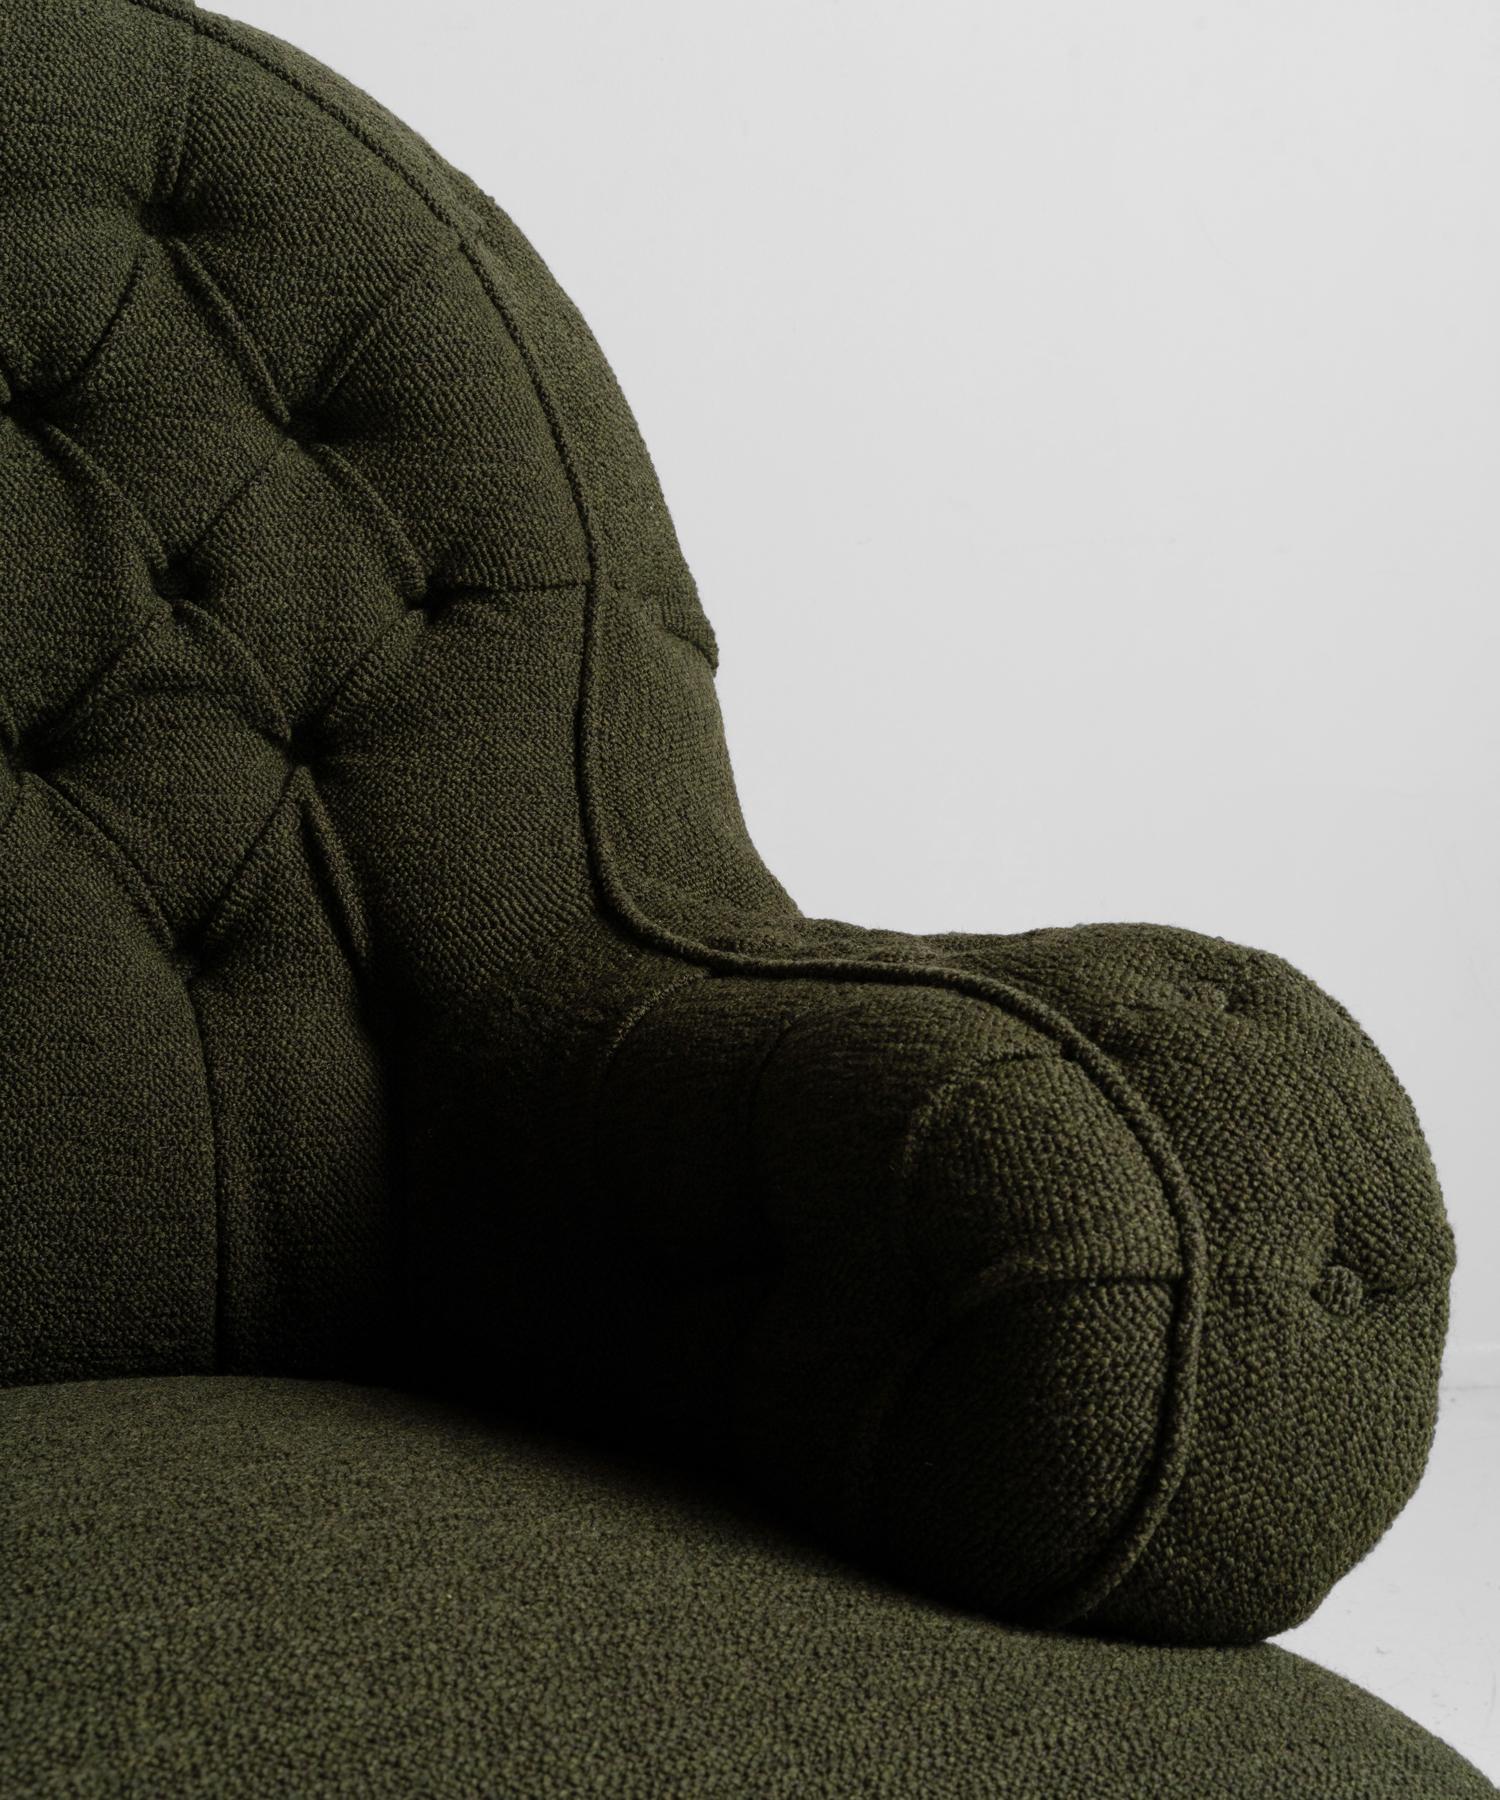 Victorian Tufted Armchairs in Wool Blend Textured Fabric 